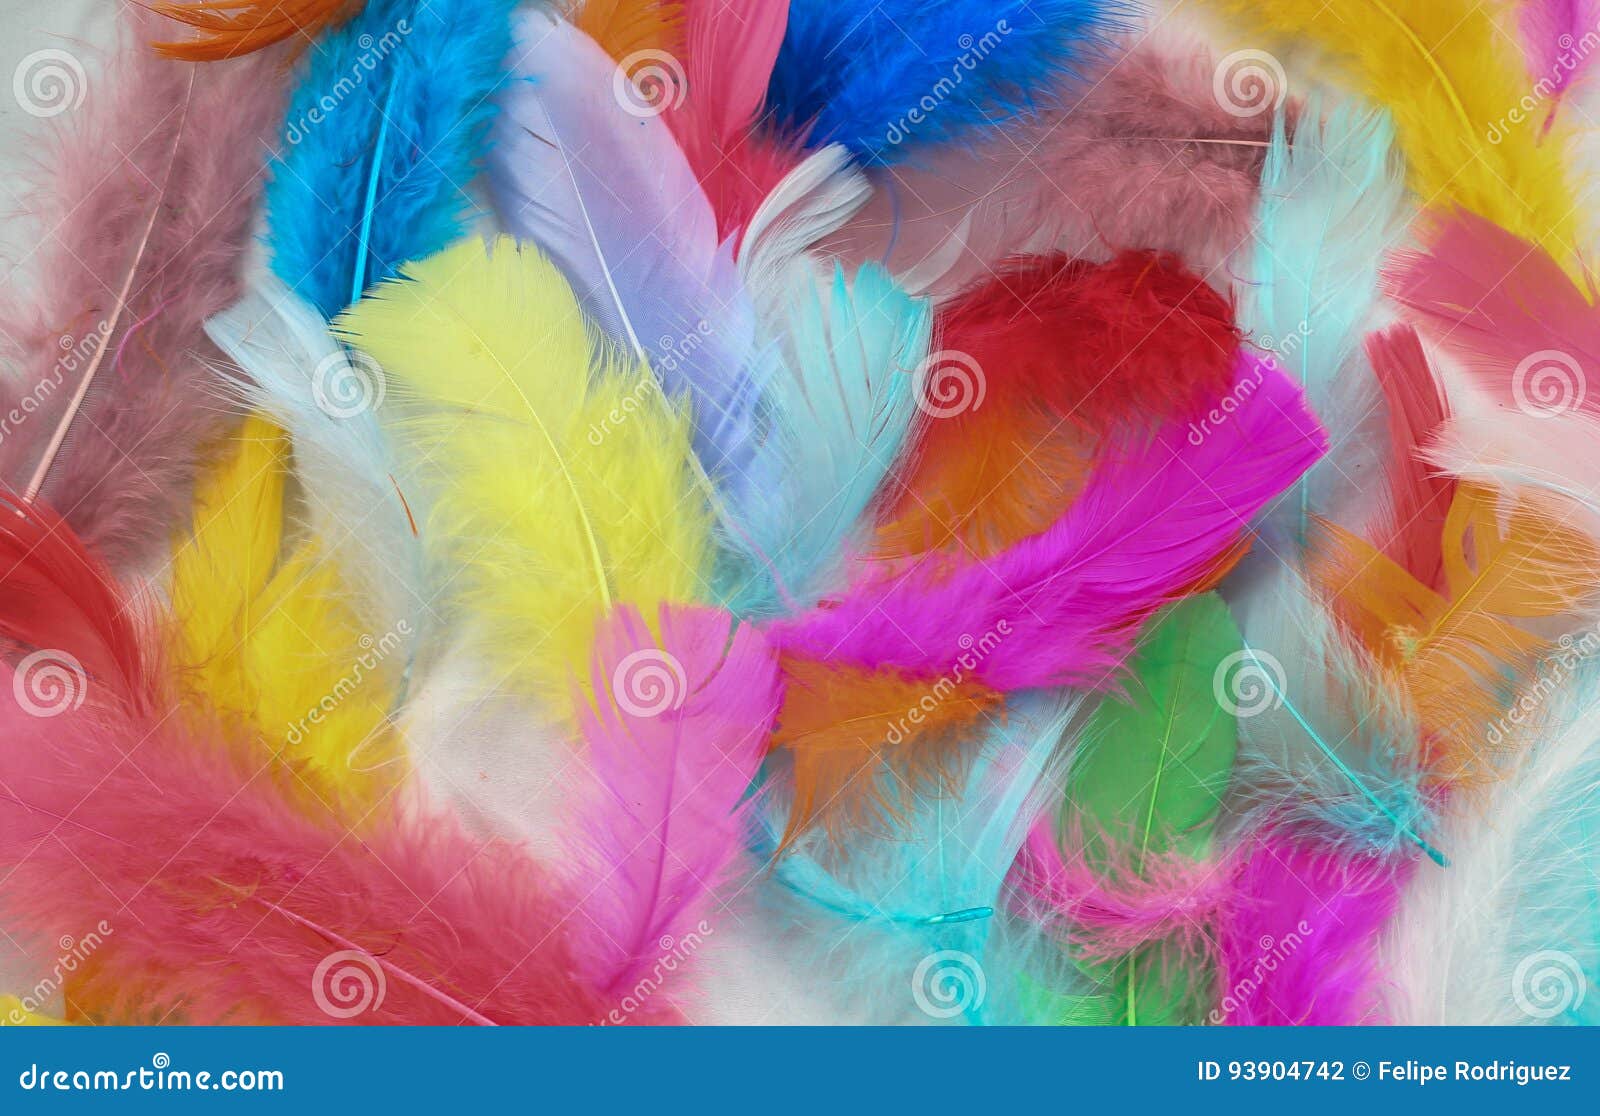 painted feathers